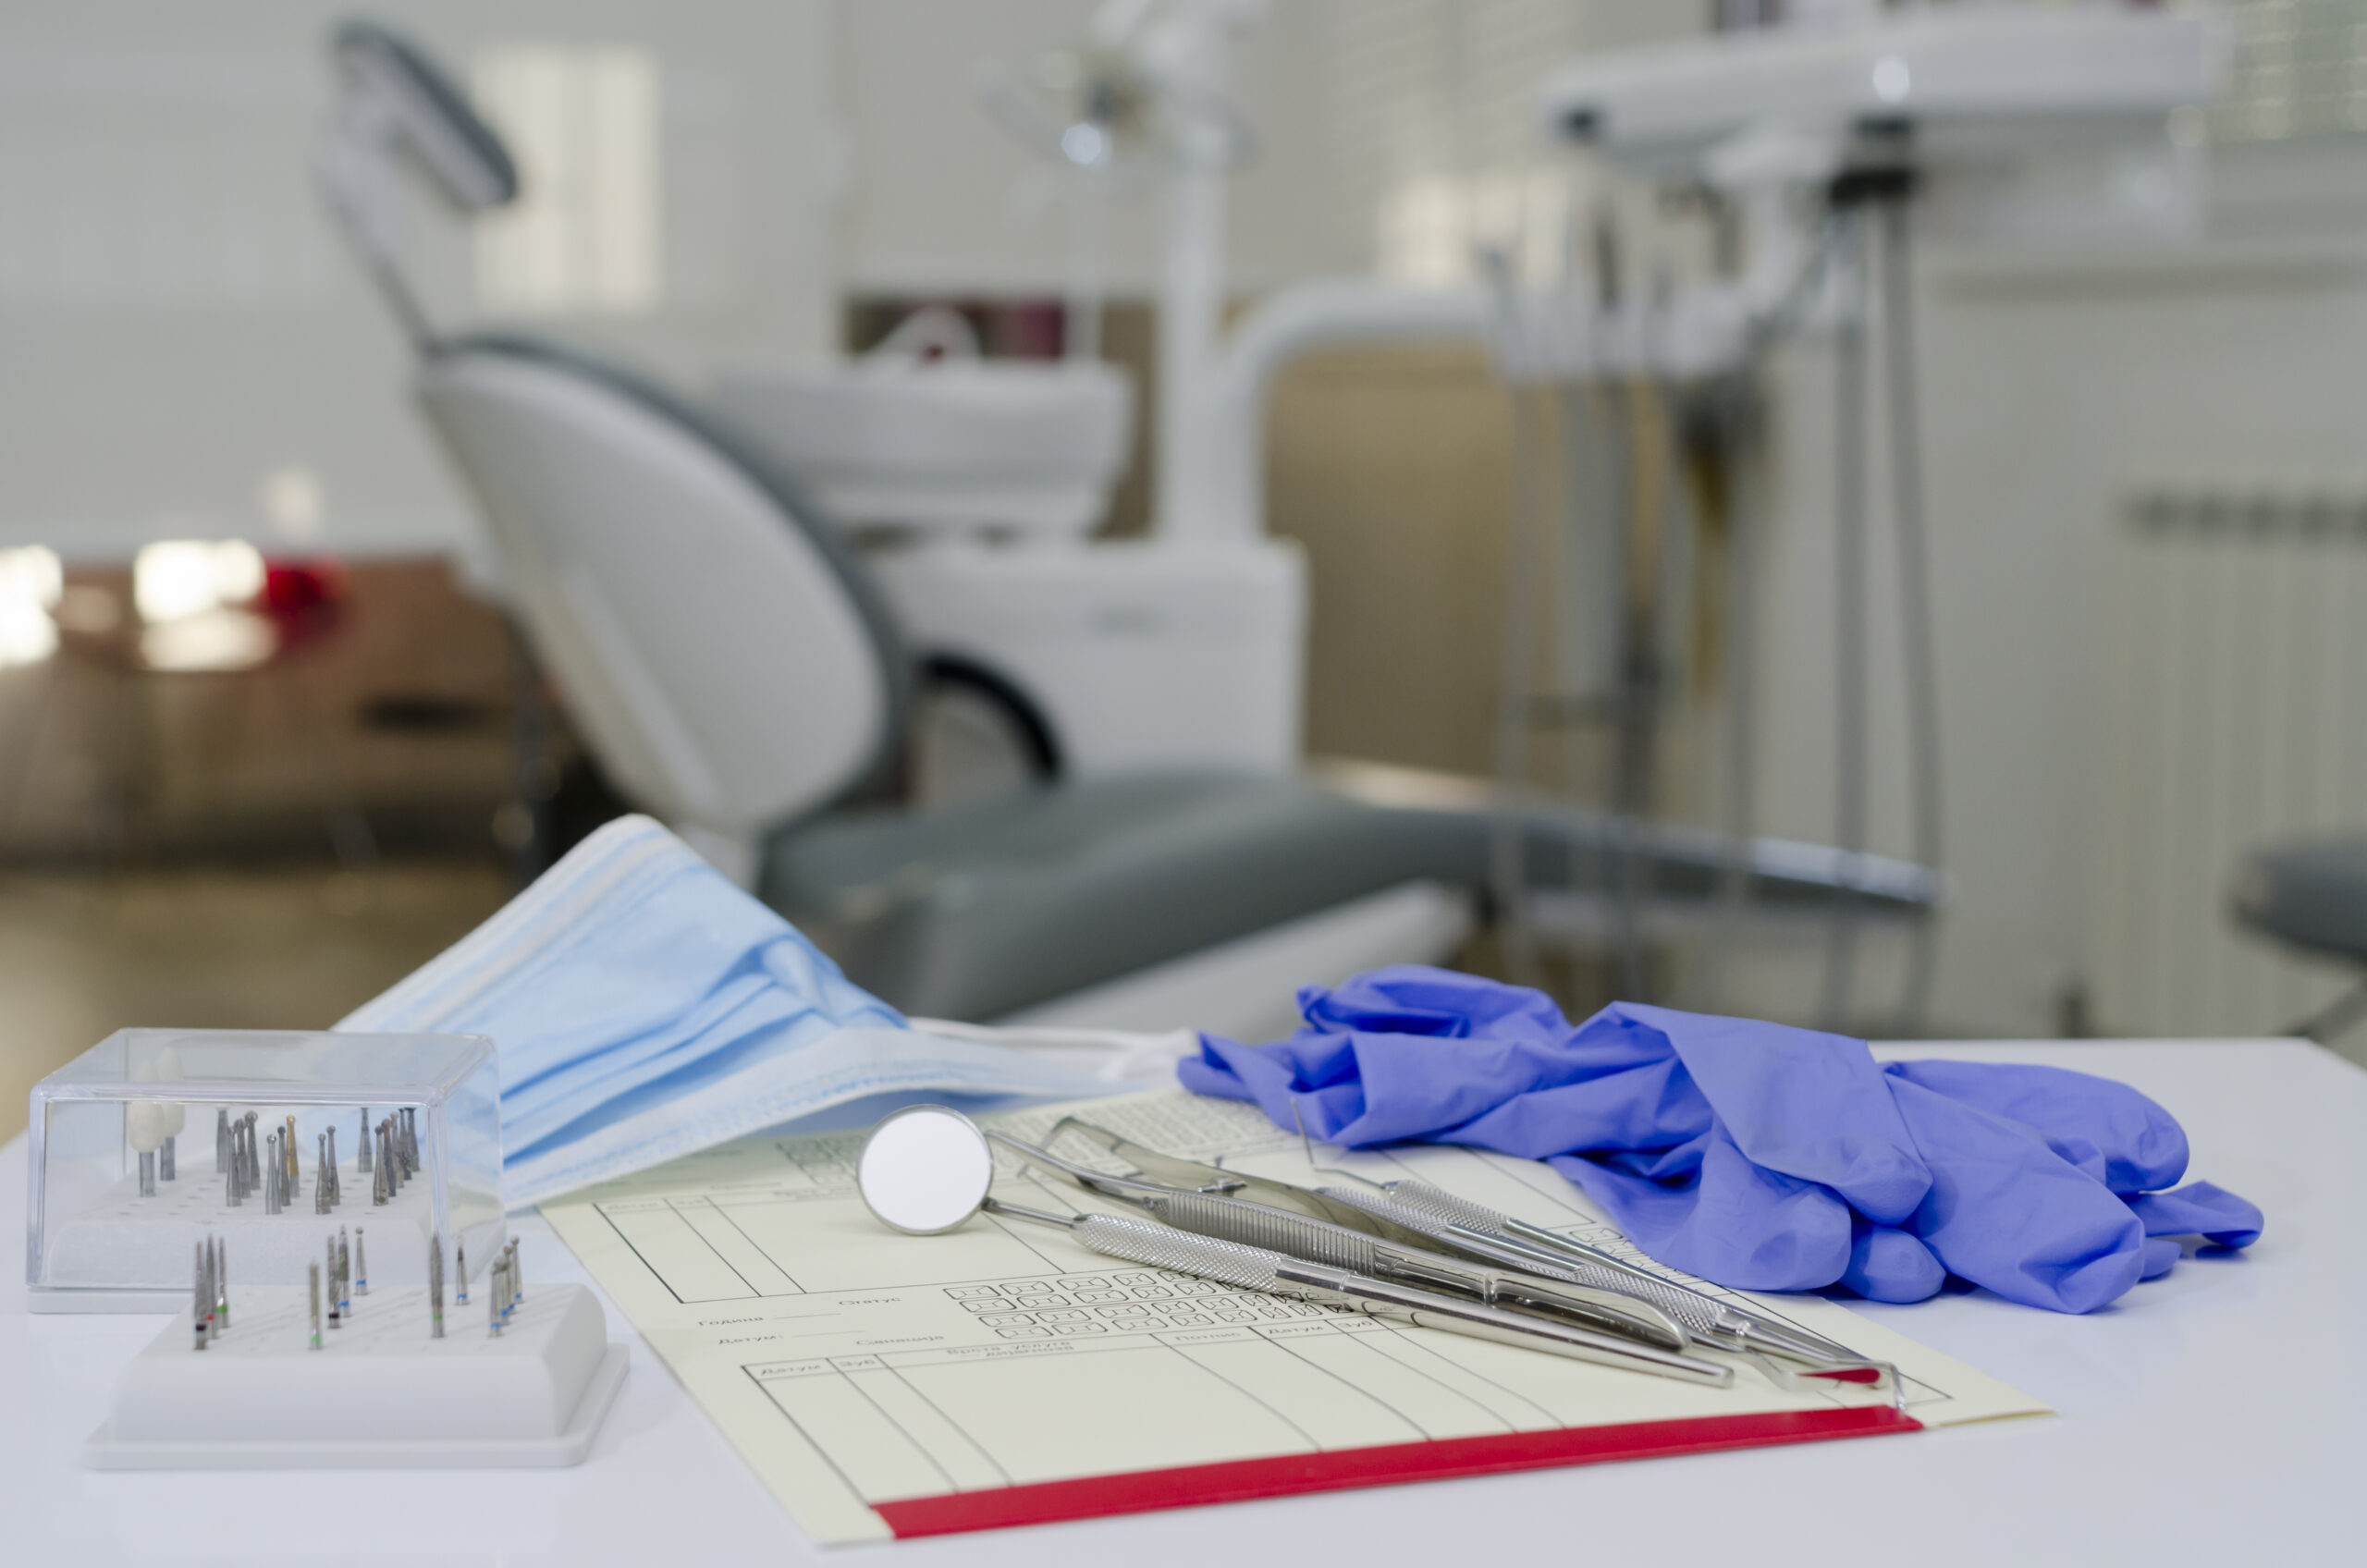 How to start a dental practice